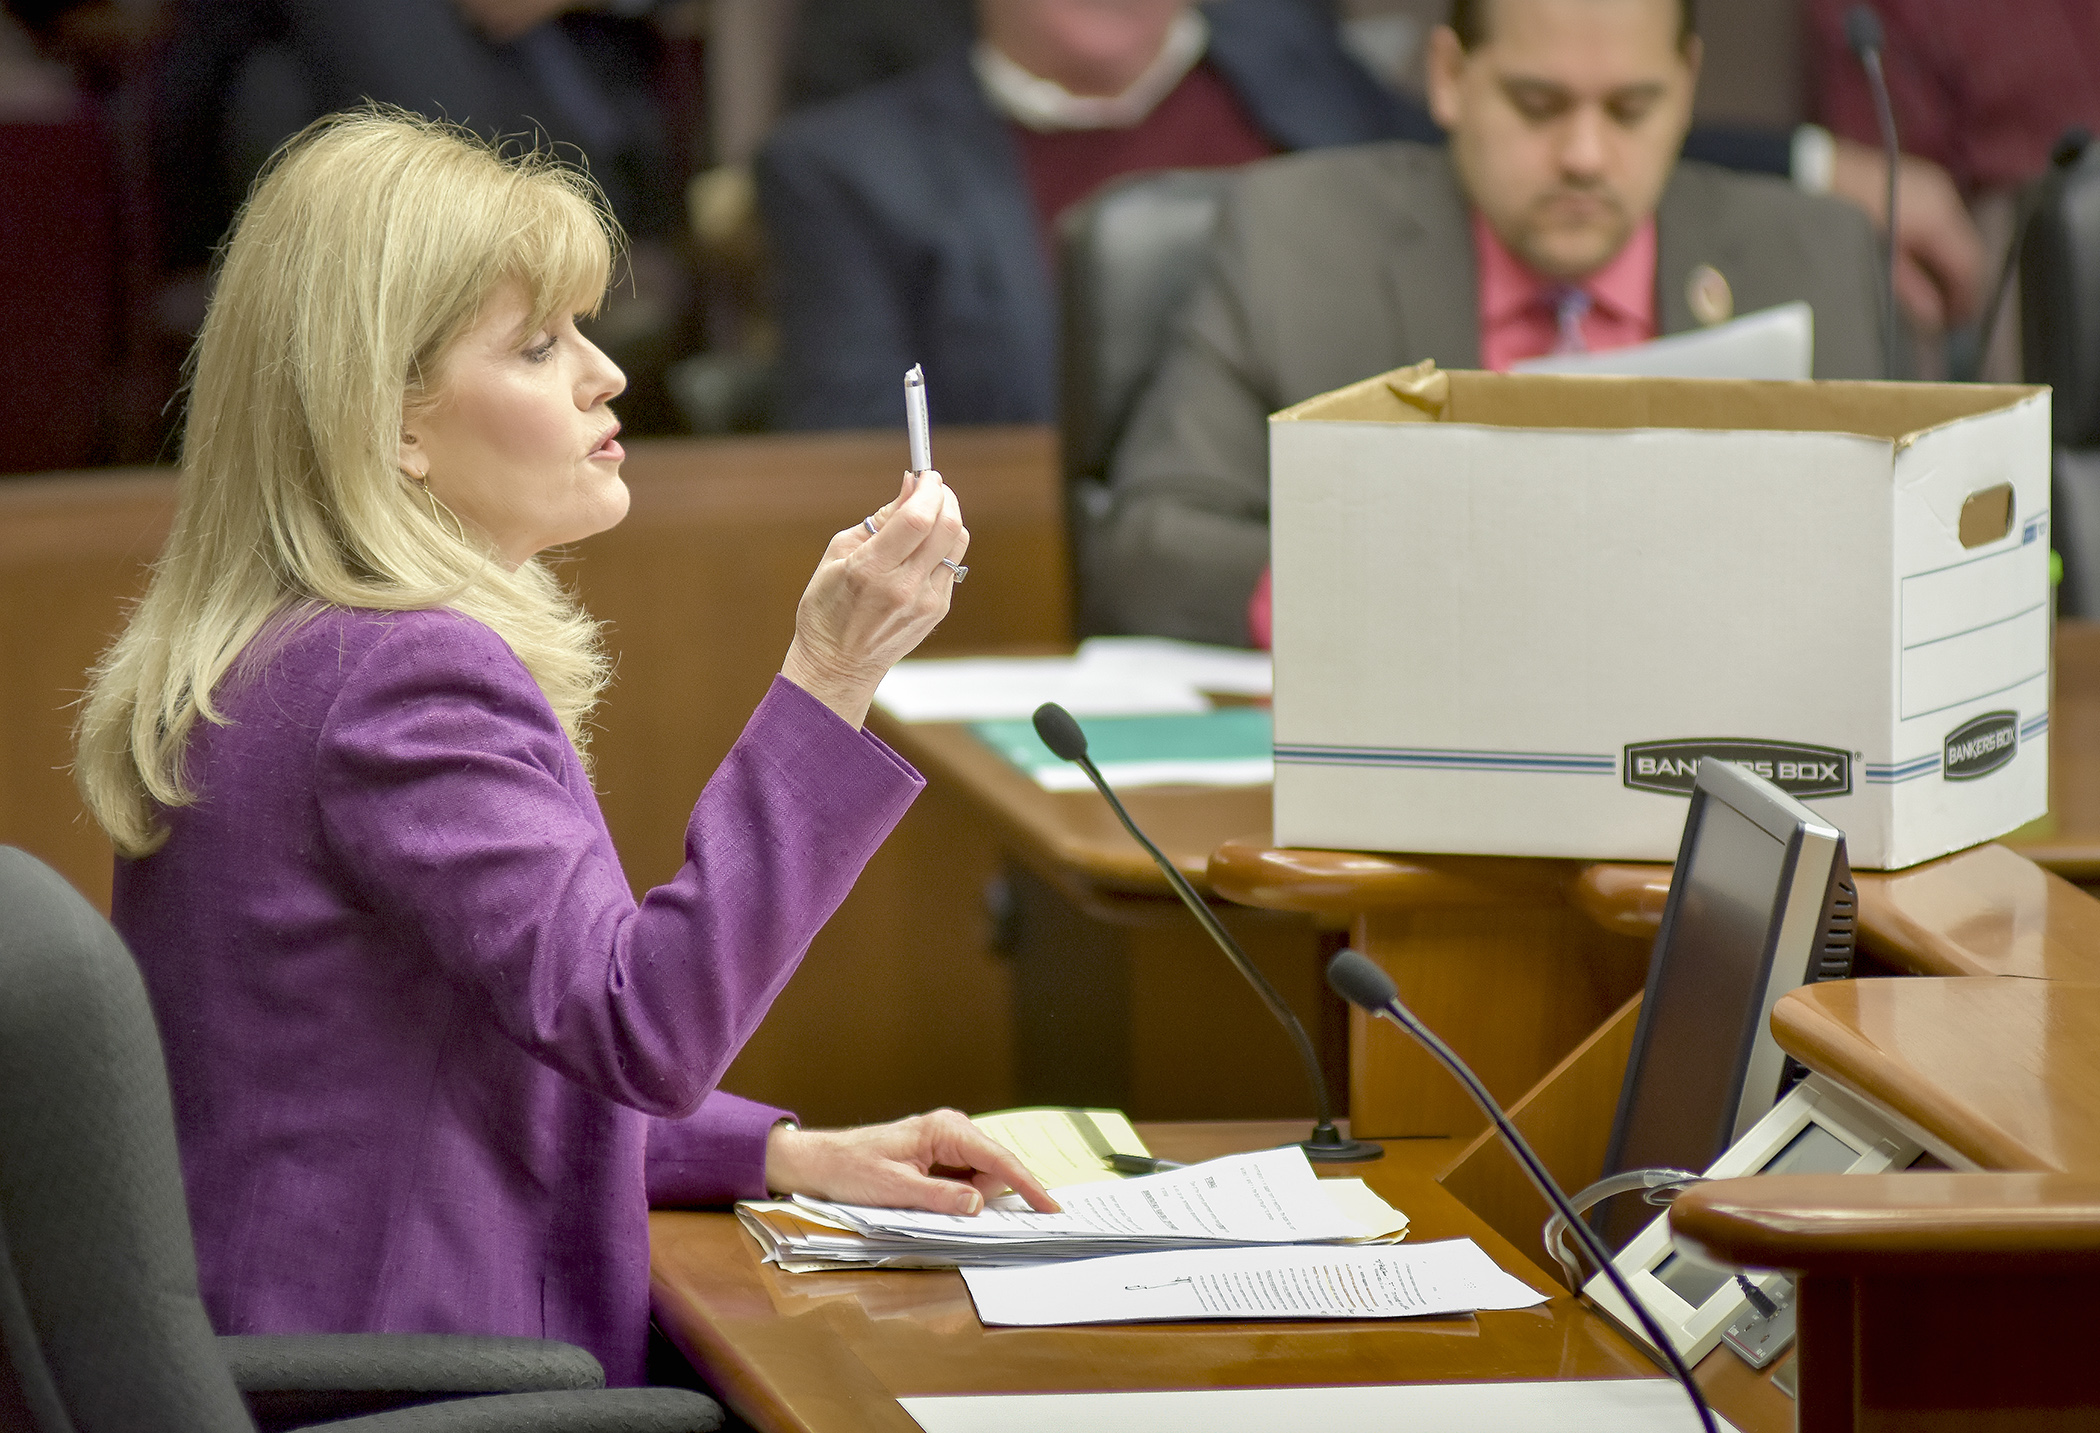 Rep. Peggy Scott displays a thumb drive and a banker’s box to illustrate methods of record storage during her Feb. 28 presentation to the House Civil Law and Data Practices Policy Committee. Photo by Andrew VonBank